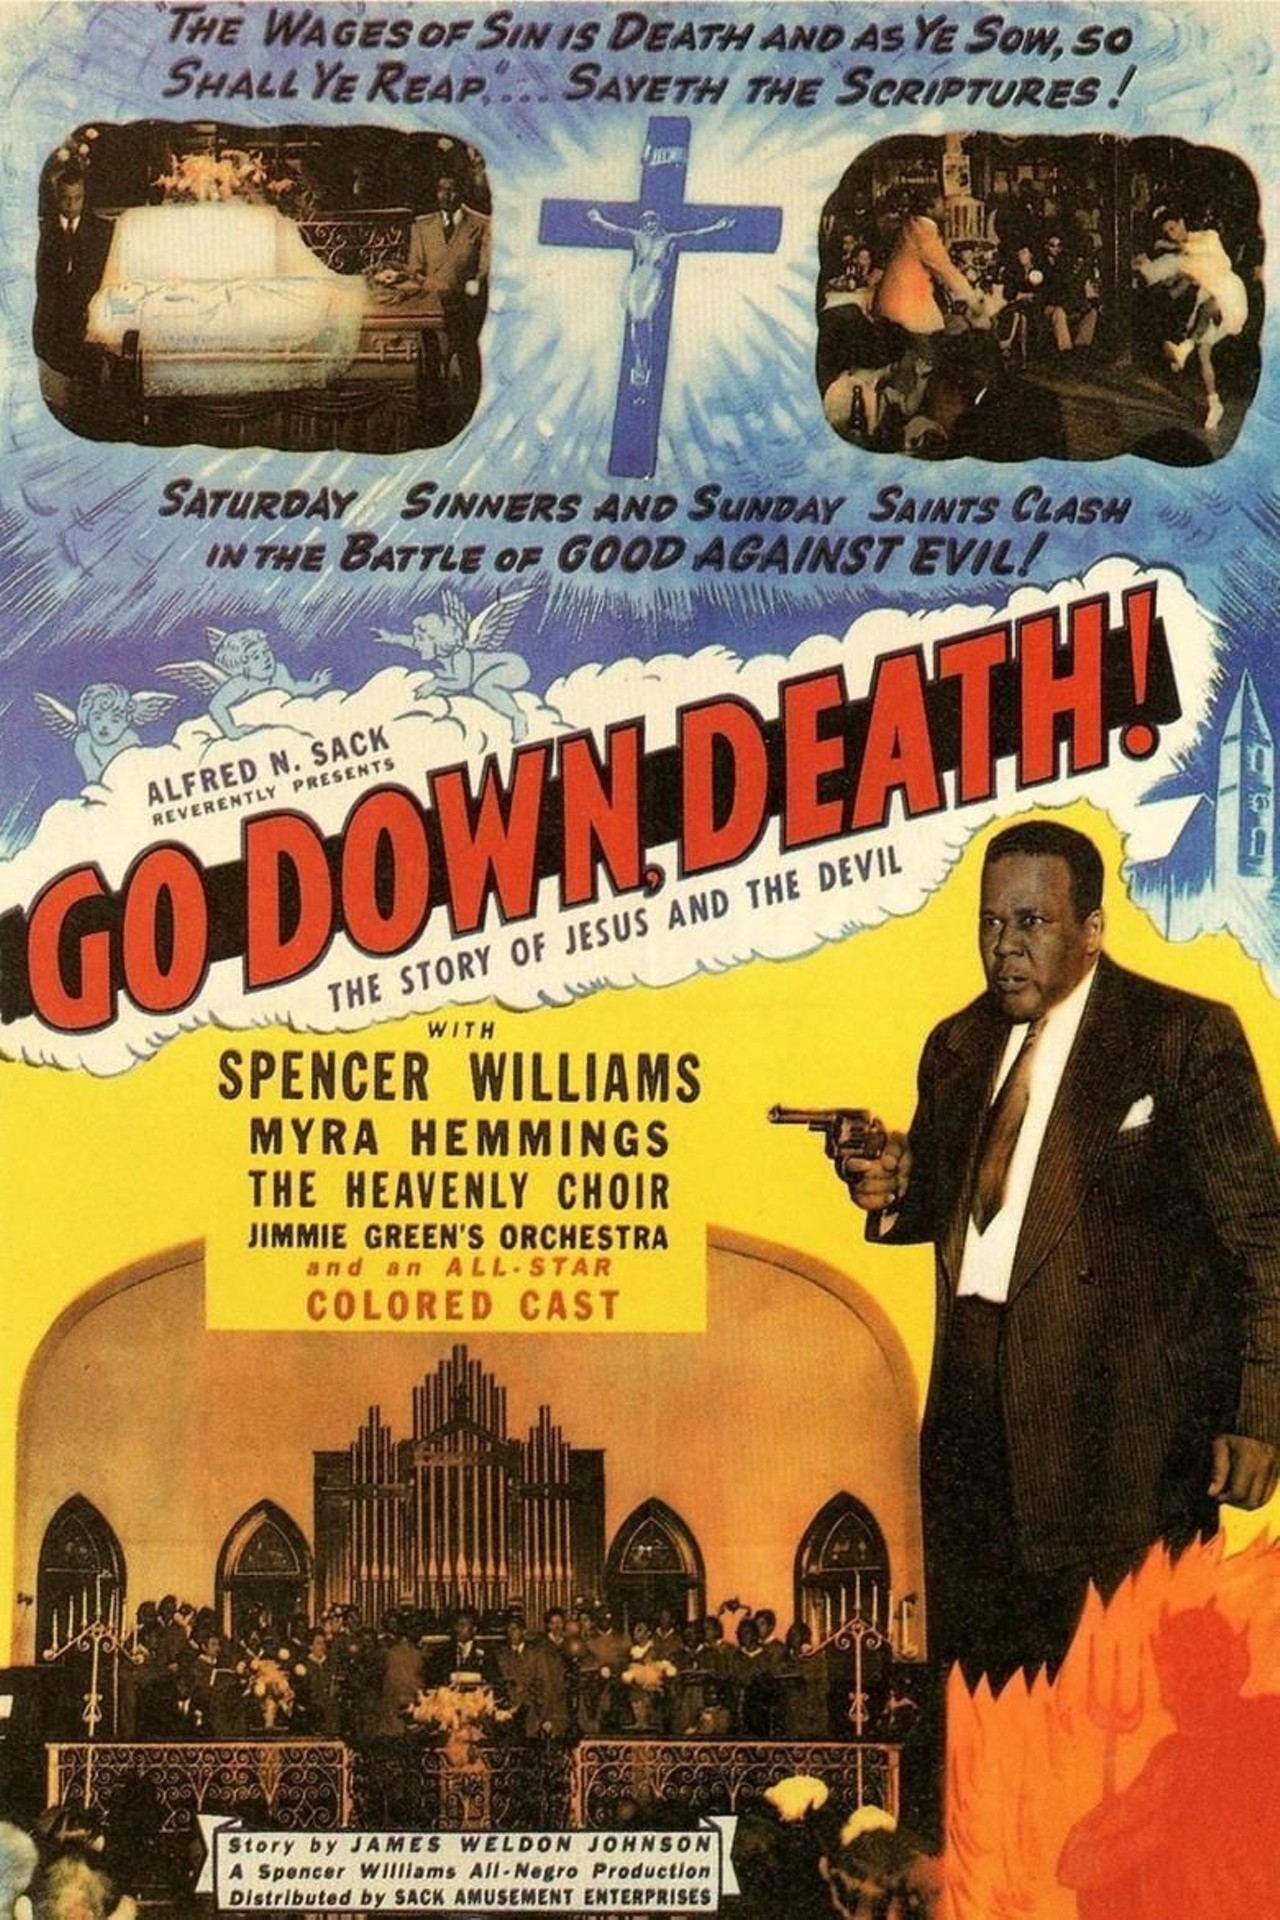 Go Down, Death!
A 1945 indie film by the pioneering African-American star and filmmaker Spencer K. Williams, Go Down, Death! was shot at various locales around our East Side. The film follows a crime boss who is eventually overcome with guilt from his war with a local preacher. Falling into the bygone category of a “race film,” Go Down, Death! features a mainly black cast and was made for black audiences. As such, the film provides an excellent opportunity to celebrate not only the achievement an esteemed black director, but also to consider, in a broad sense, the important contributions made by San Antonio’s African-American community. 
Photo courtesy of Sack Amusement Pictures